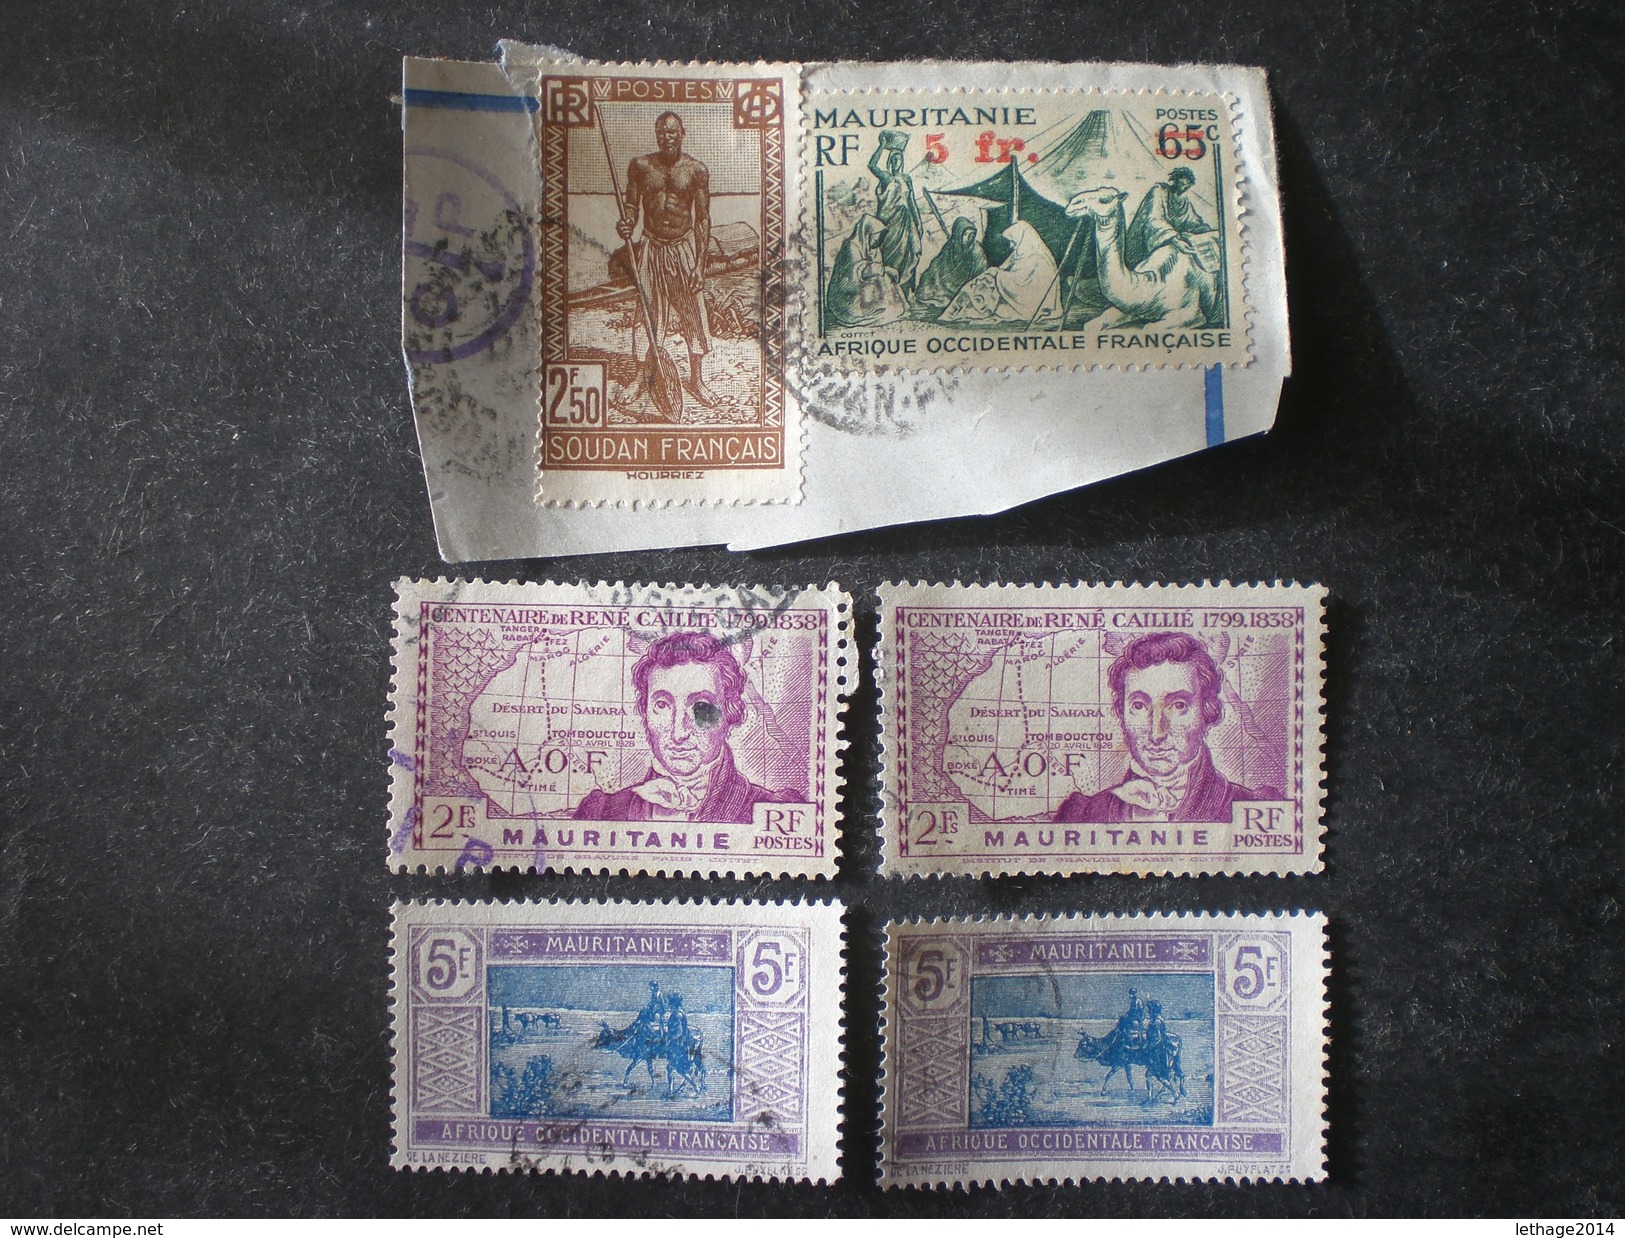 AOF MAURITANIA MAURITANIE موريتانيا Mauritanië 1944 Issues Of 1938 And 1939 Surcharged  + 1906 CAMEL - Oblitérés